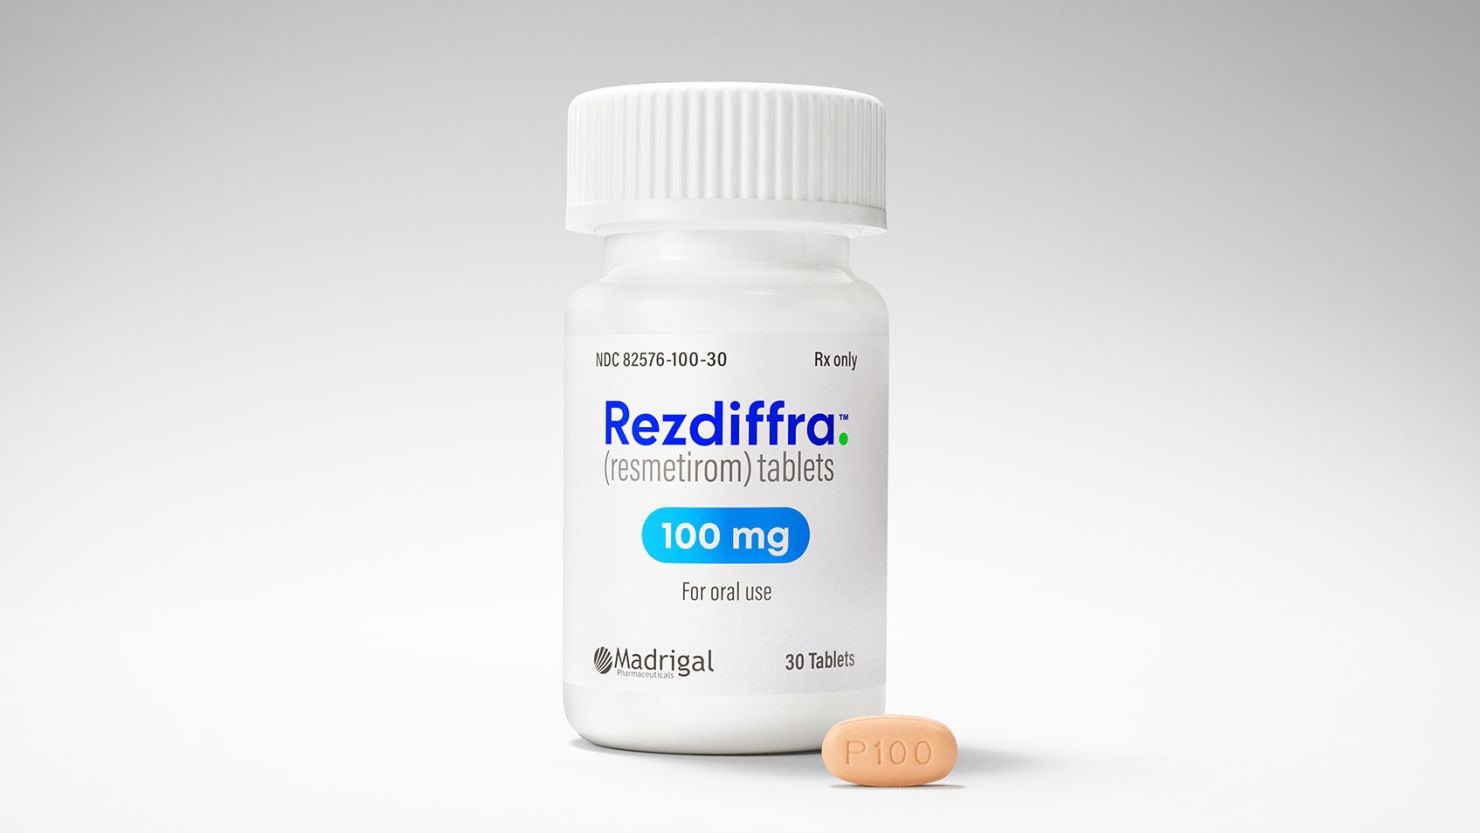 This image from Madrigal Pharmaceuticals shows the drug Rezdiffra.